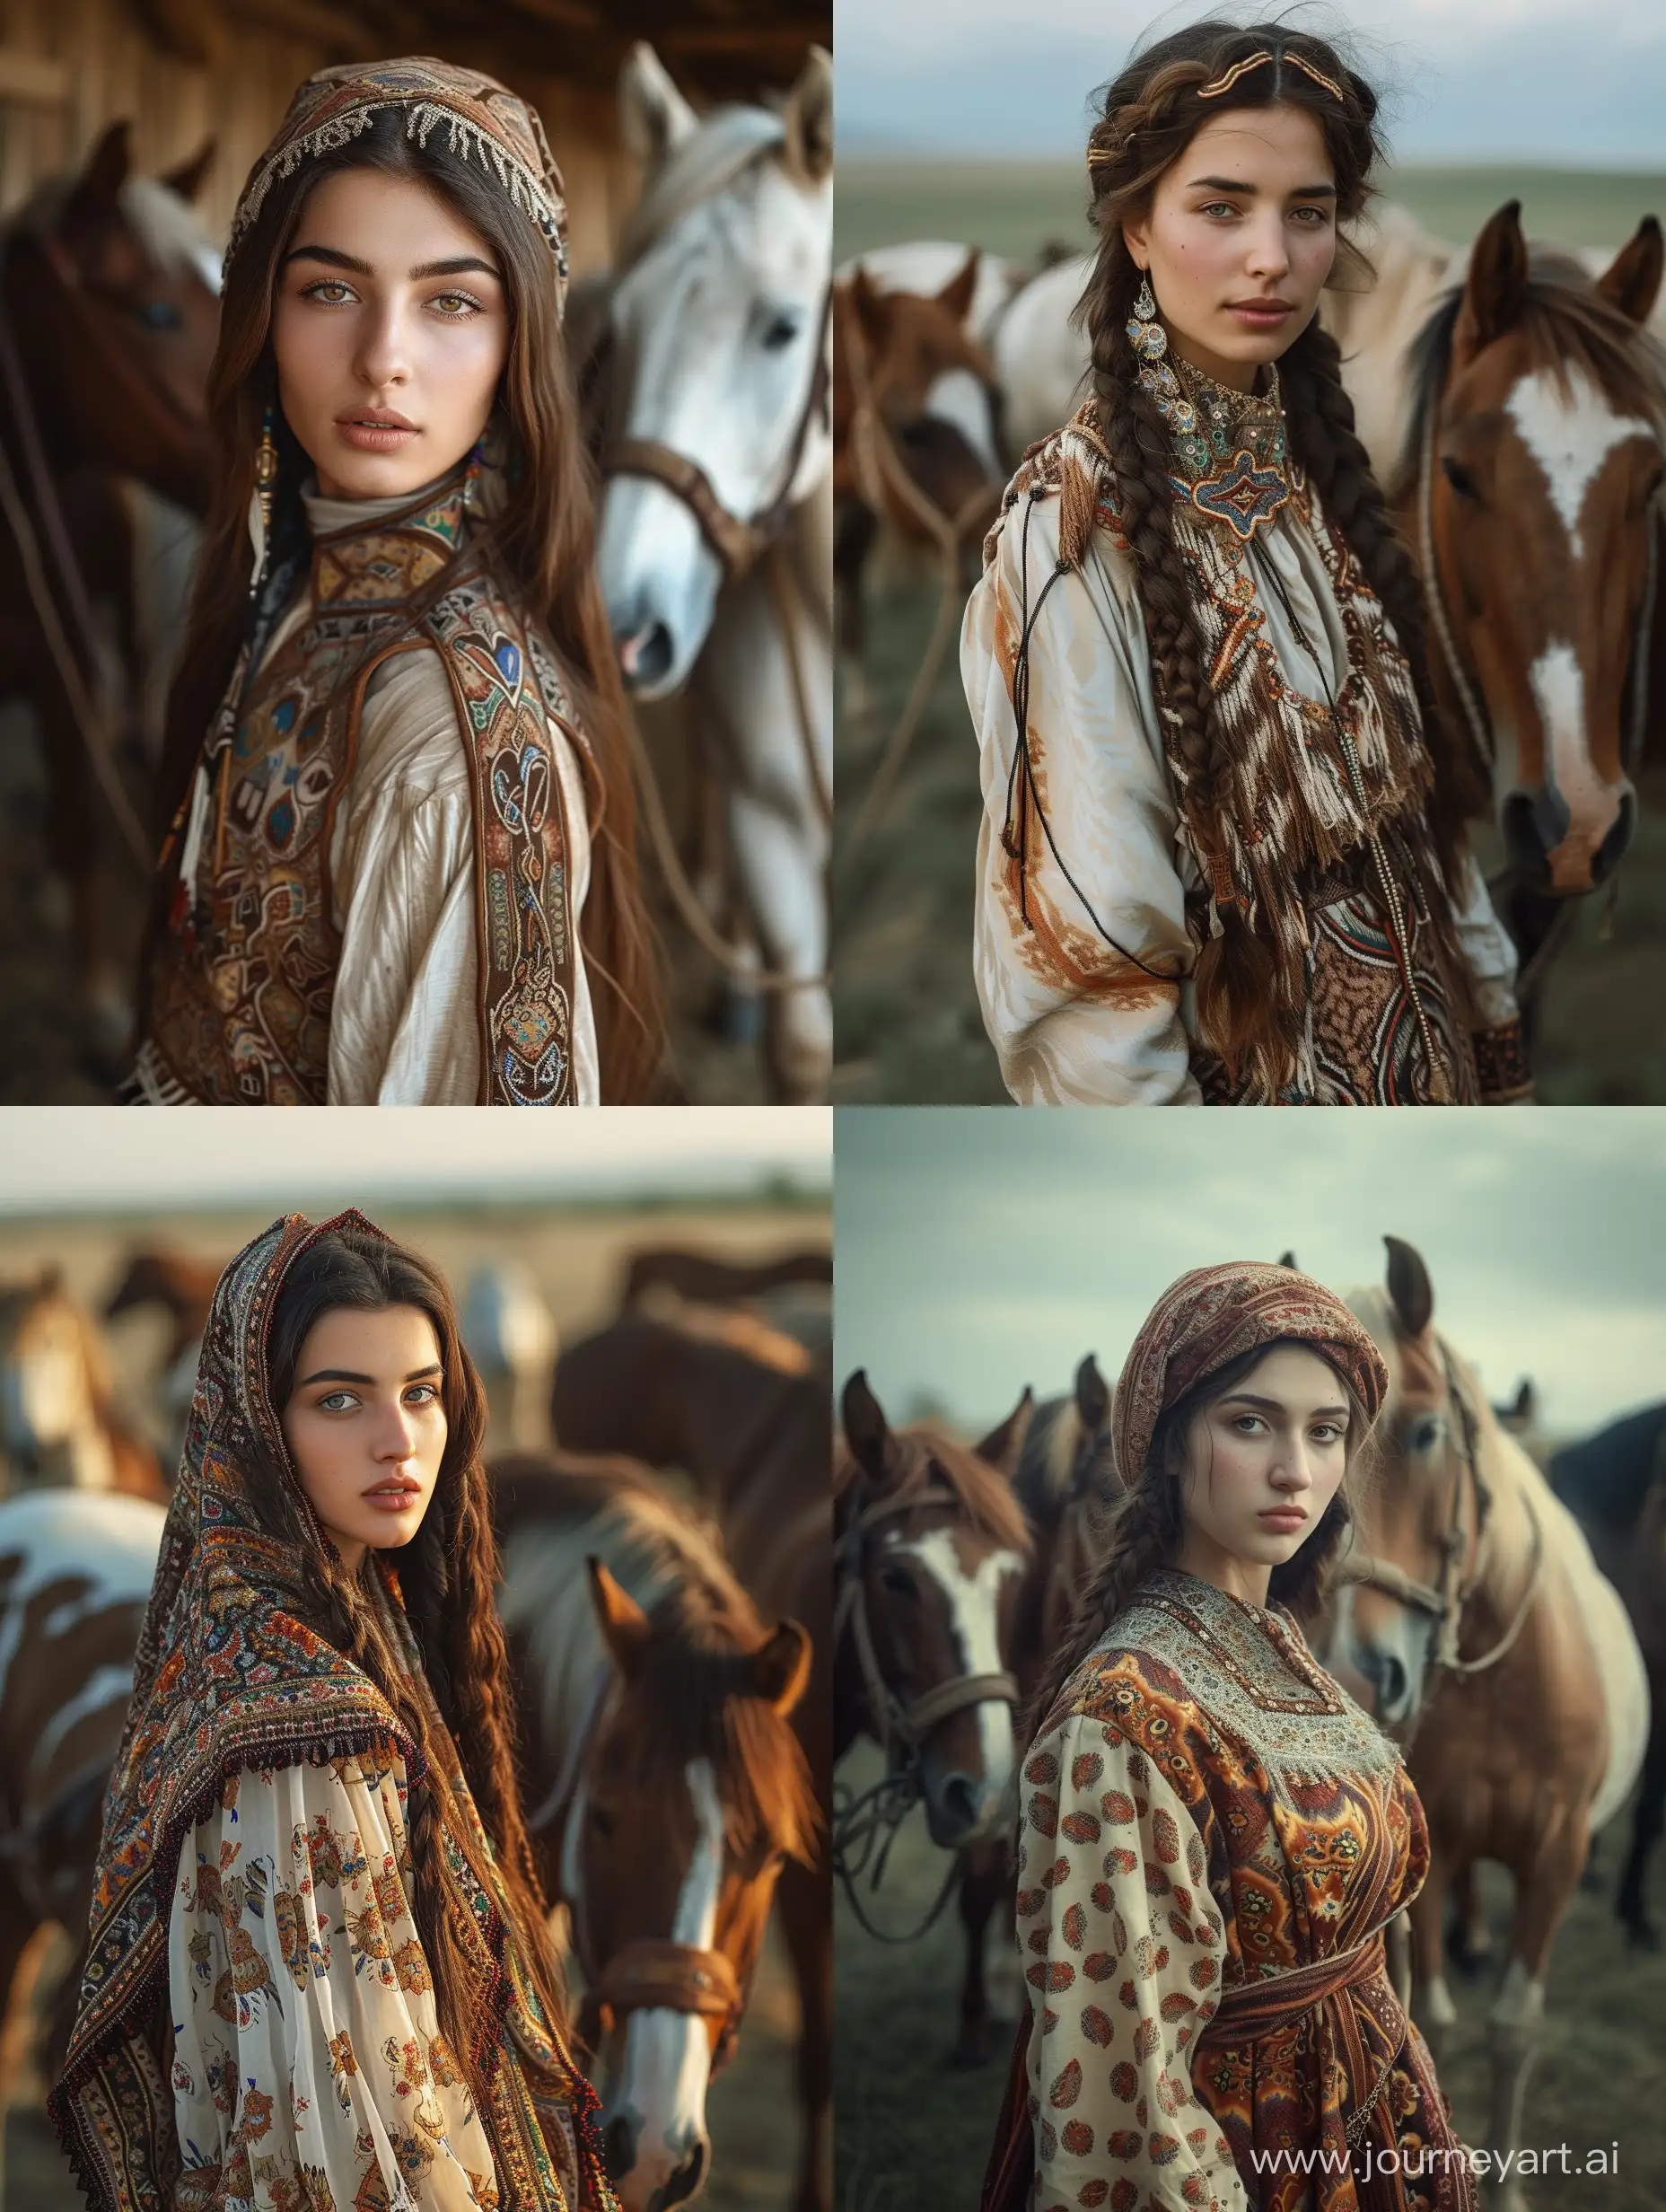 high-resolution, Image of a circassian Woman in a Village with horses. Sehe hast traditional clothes in "cherkeska", Dress. Sehe ist beautiful, handsome, 20 years old.